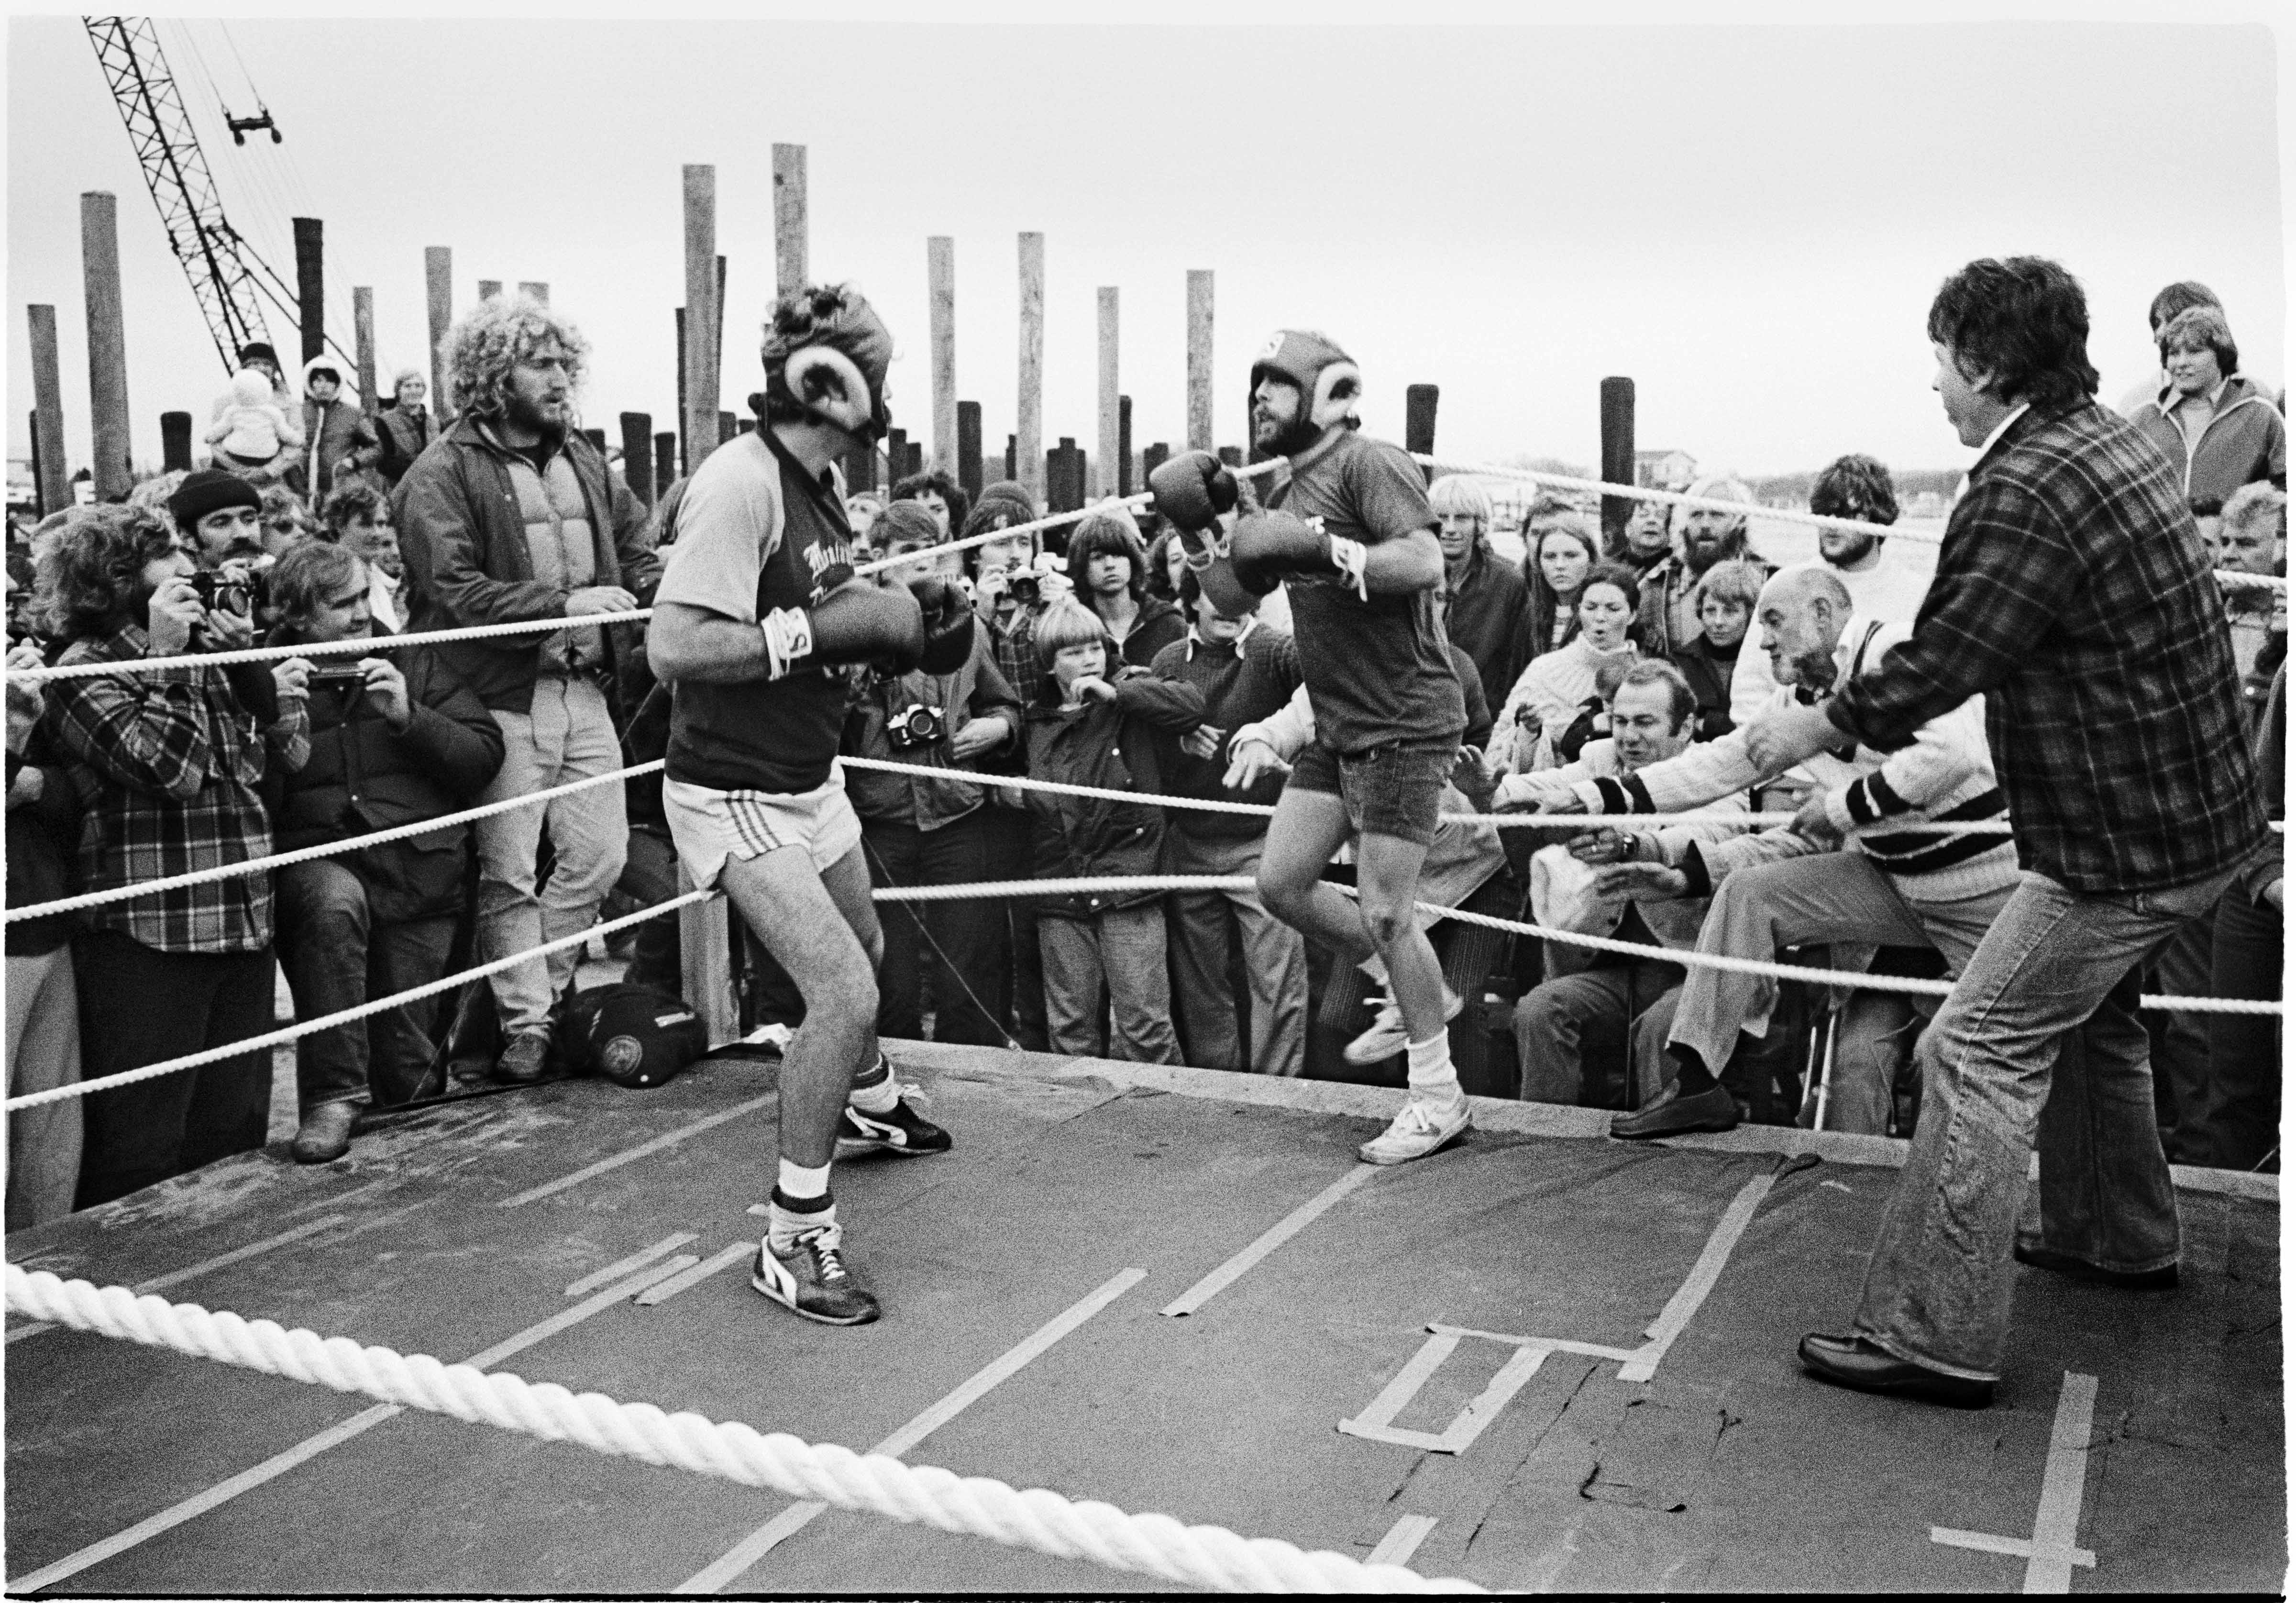 Bobby Izenburg vs Tom McInerney (#19). Ringside, from left to right, Kevin (aka Pot) MacCann, brother Roger McCann, and Jerry Knolan. Photo: Tom Watson